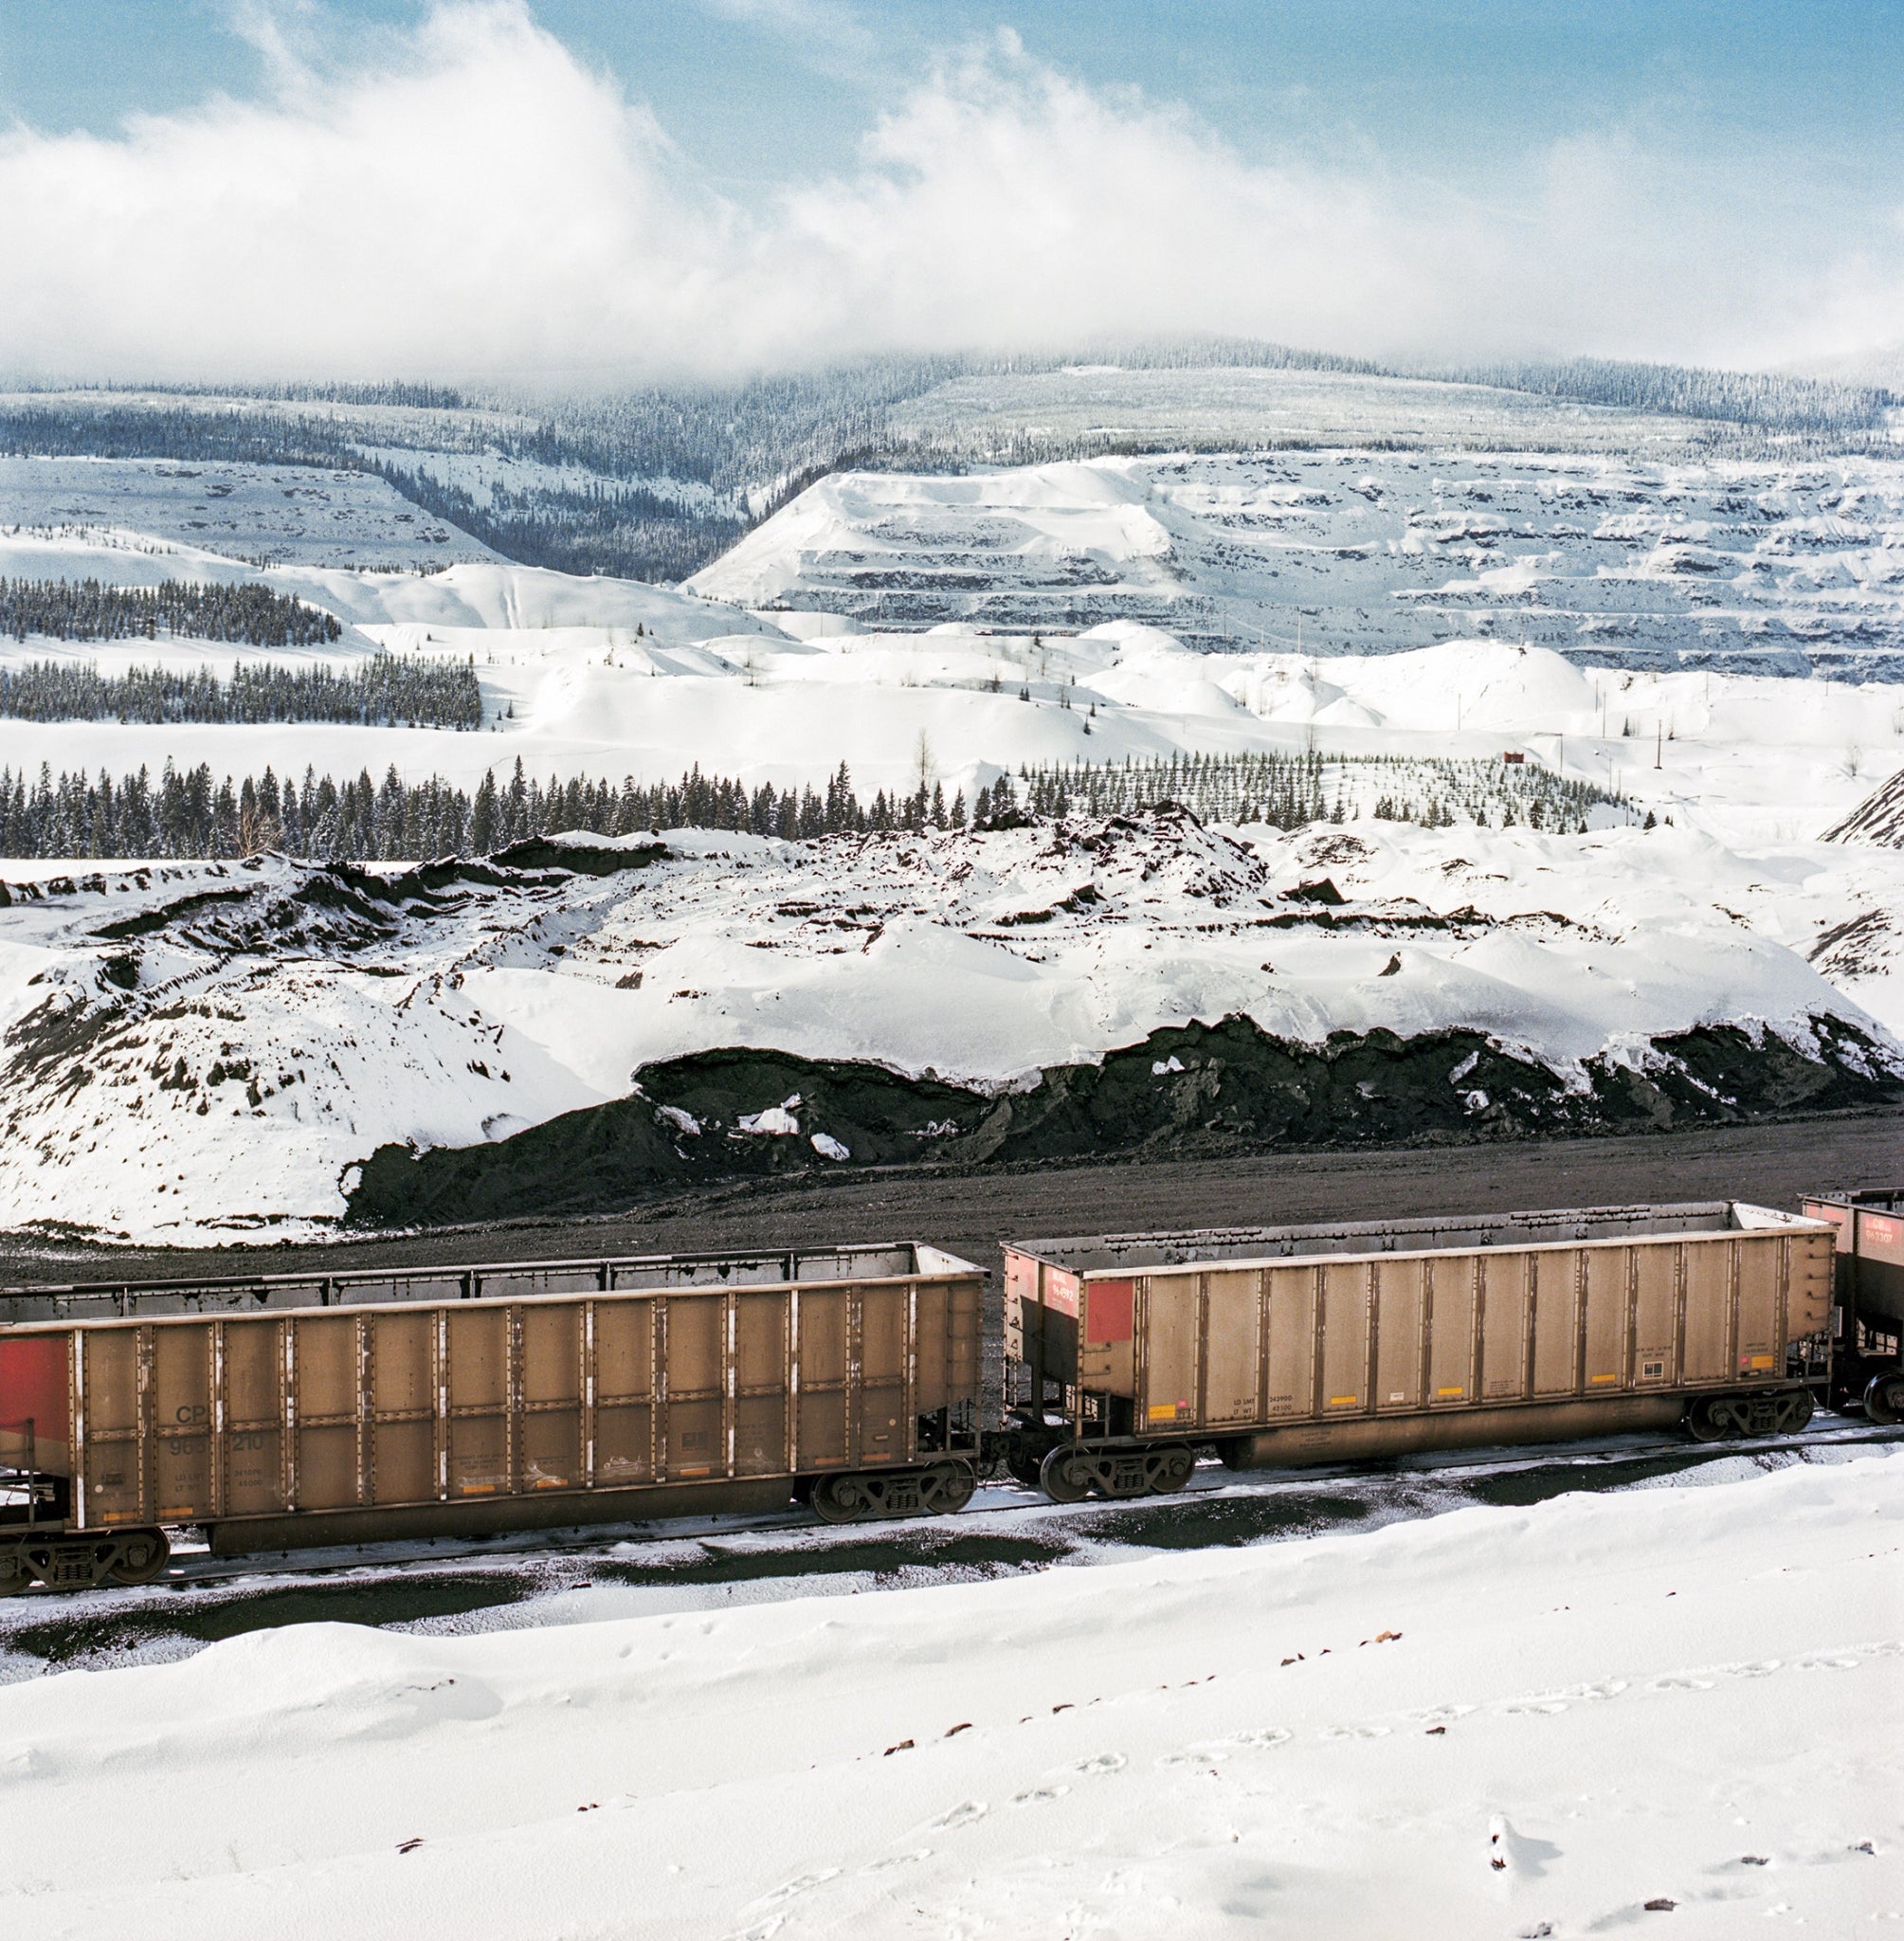 Train cars to be filled with coal at Fording River Operations near Elkford, British Columbia. A significant amount of the coal from Elk Valley travels over 600 miles by rail to Vancouver and then is shipped across the world, primarily to China, where it’s turned into steel. Photo: Kari Medig.